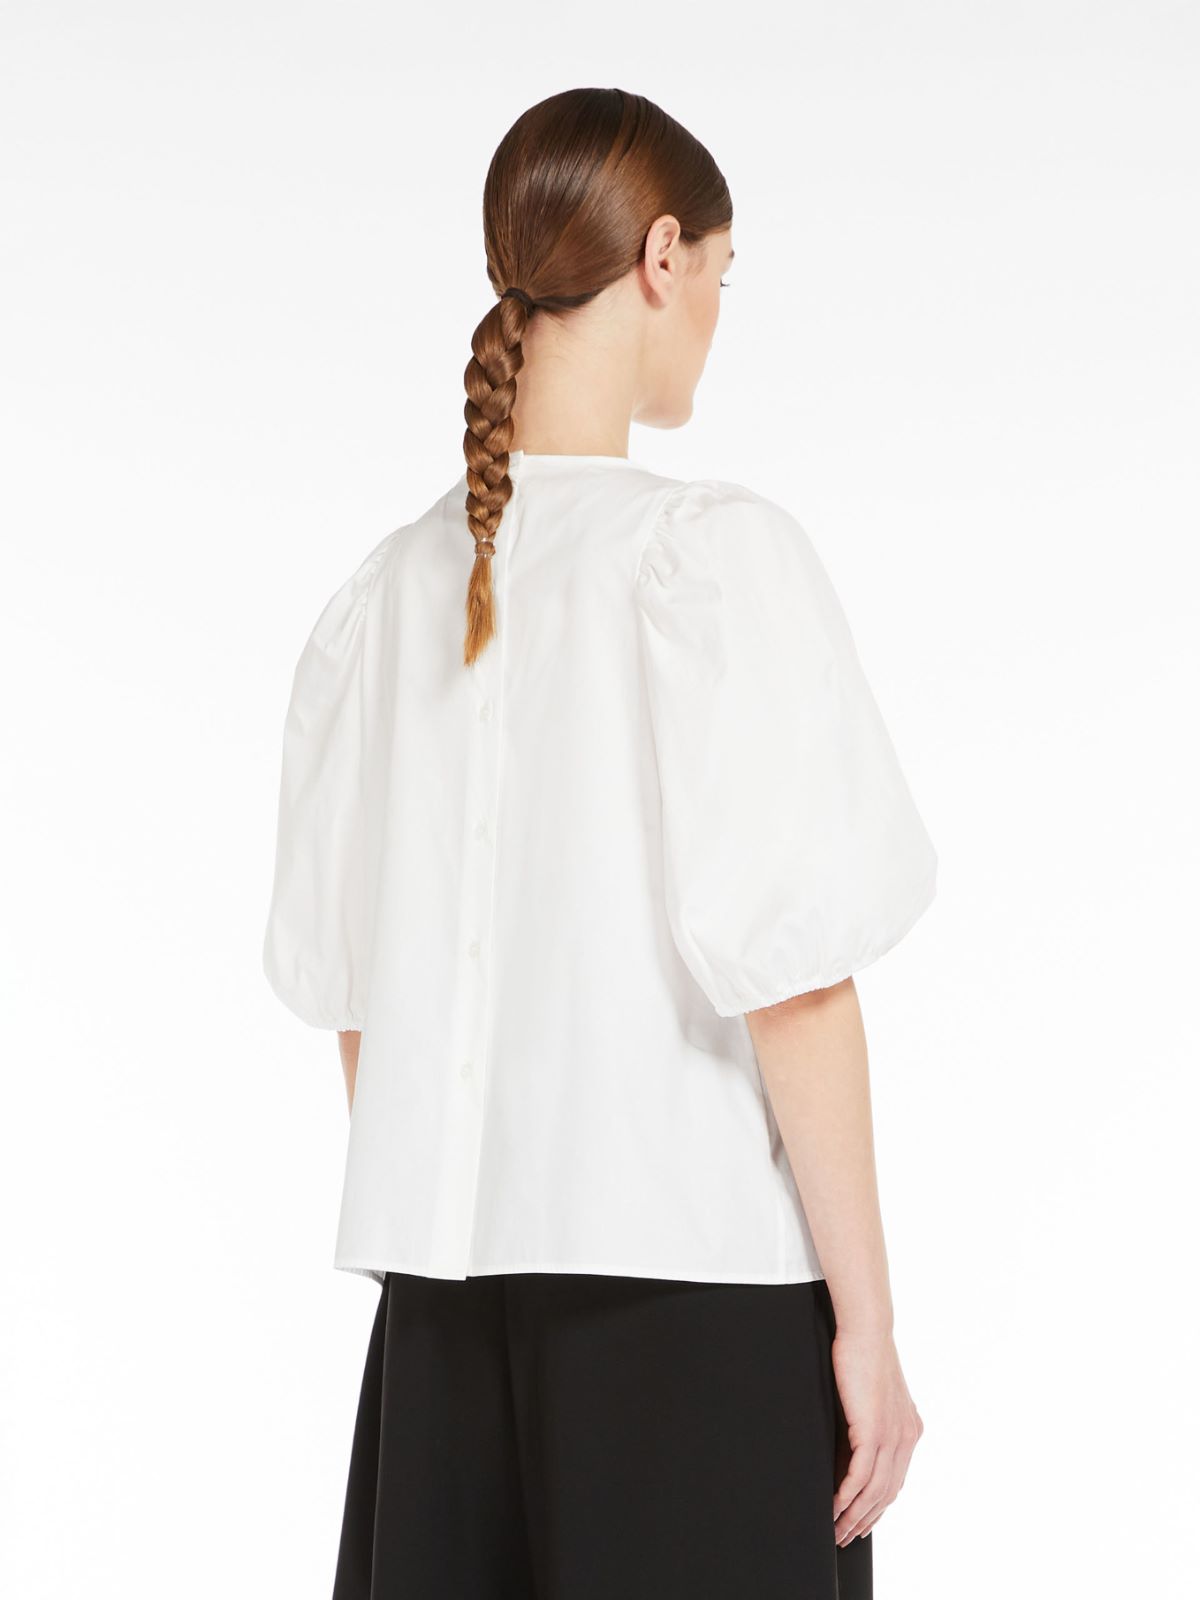 Poplin blouse with embroidery - OPTICAL WHITE - Weekend Max Mara - 3